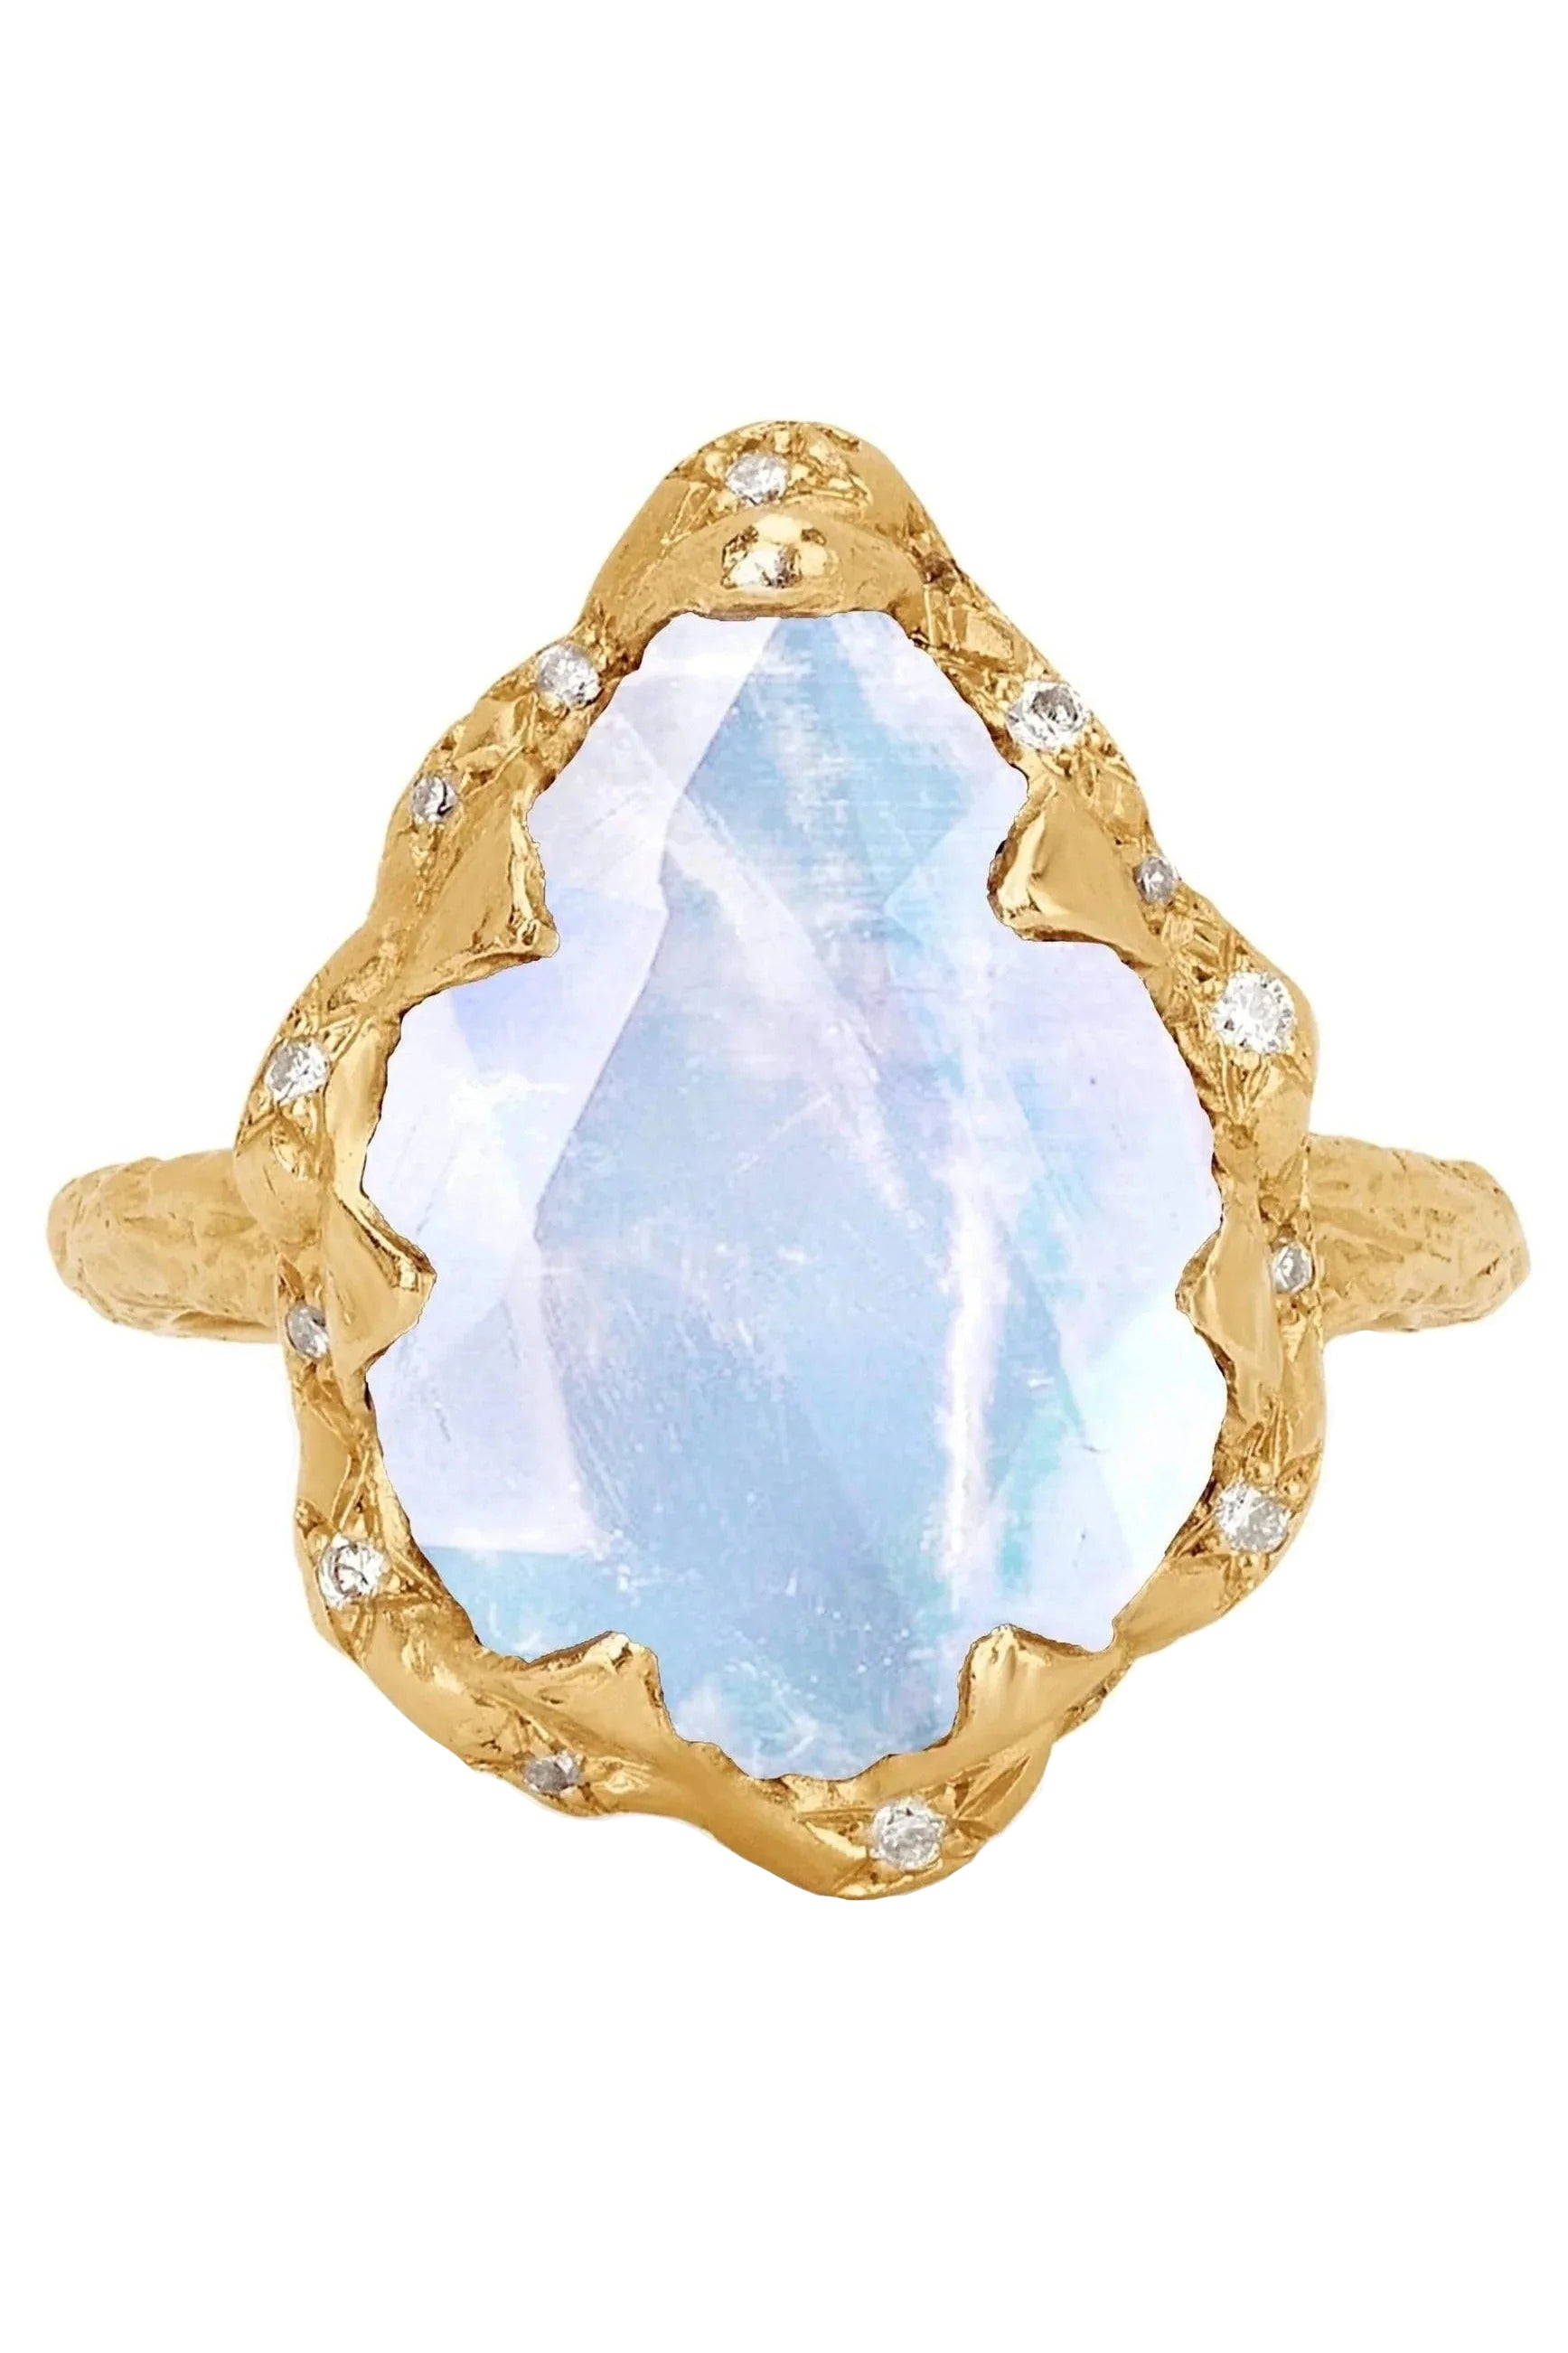 Queen Moonstone Ring with Sprinkled Diamonds JEWELRYFINE JEWELRING LOGAN HOLLOWELL   